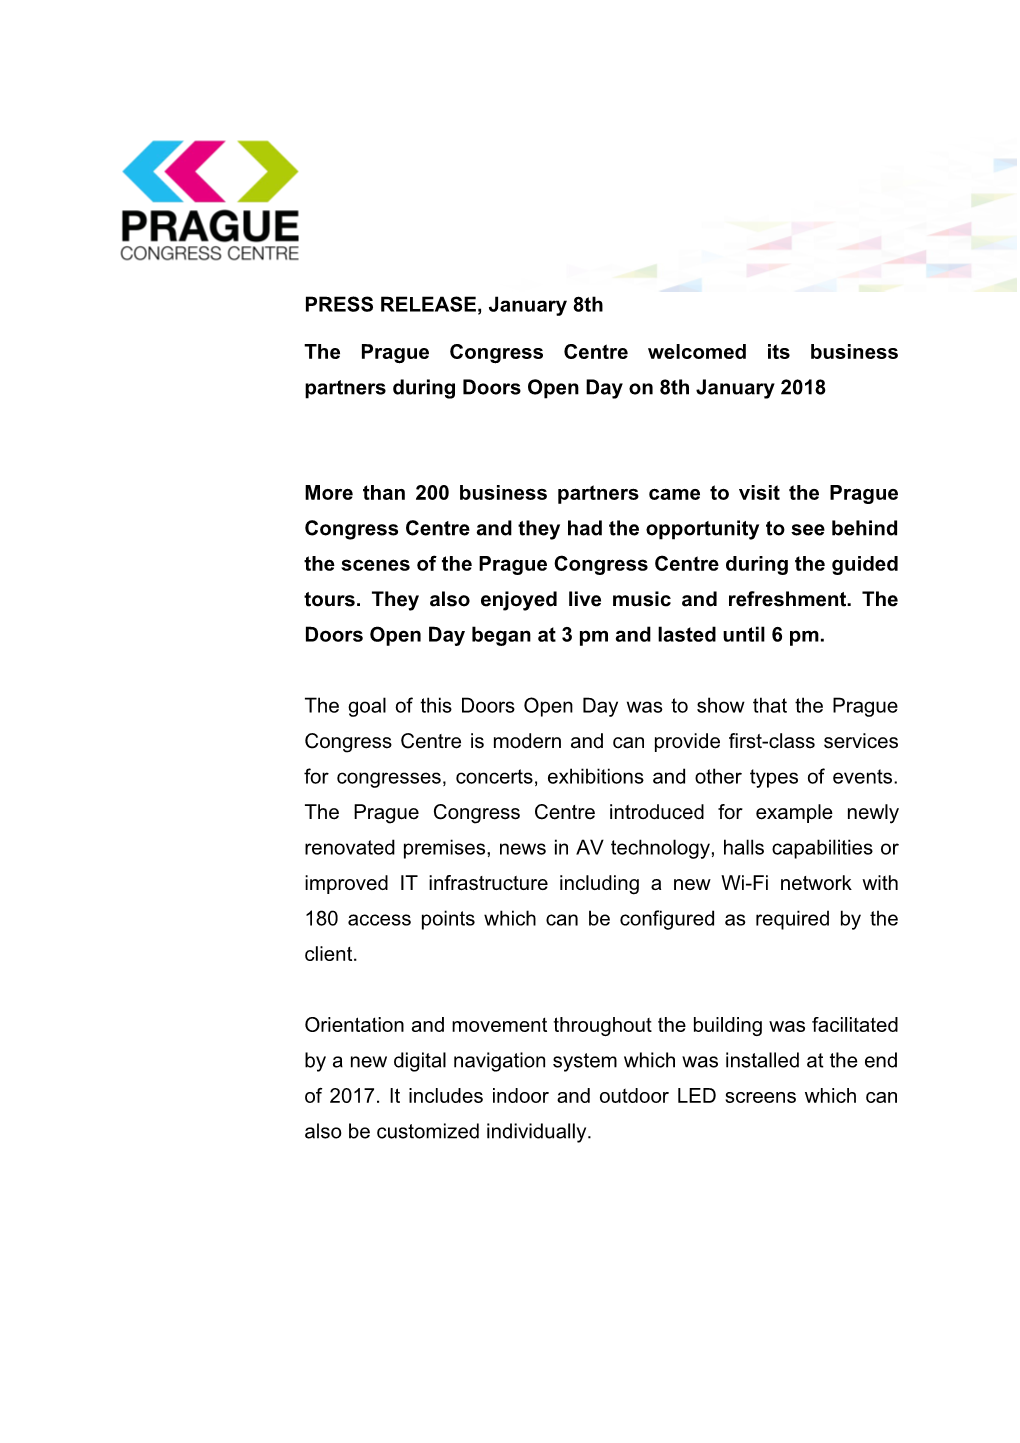 The Prague Congress Centre Welcomedits Business Partnersduringdoors Open Day on 8Th January